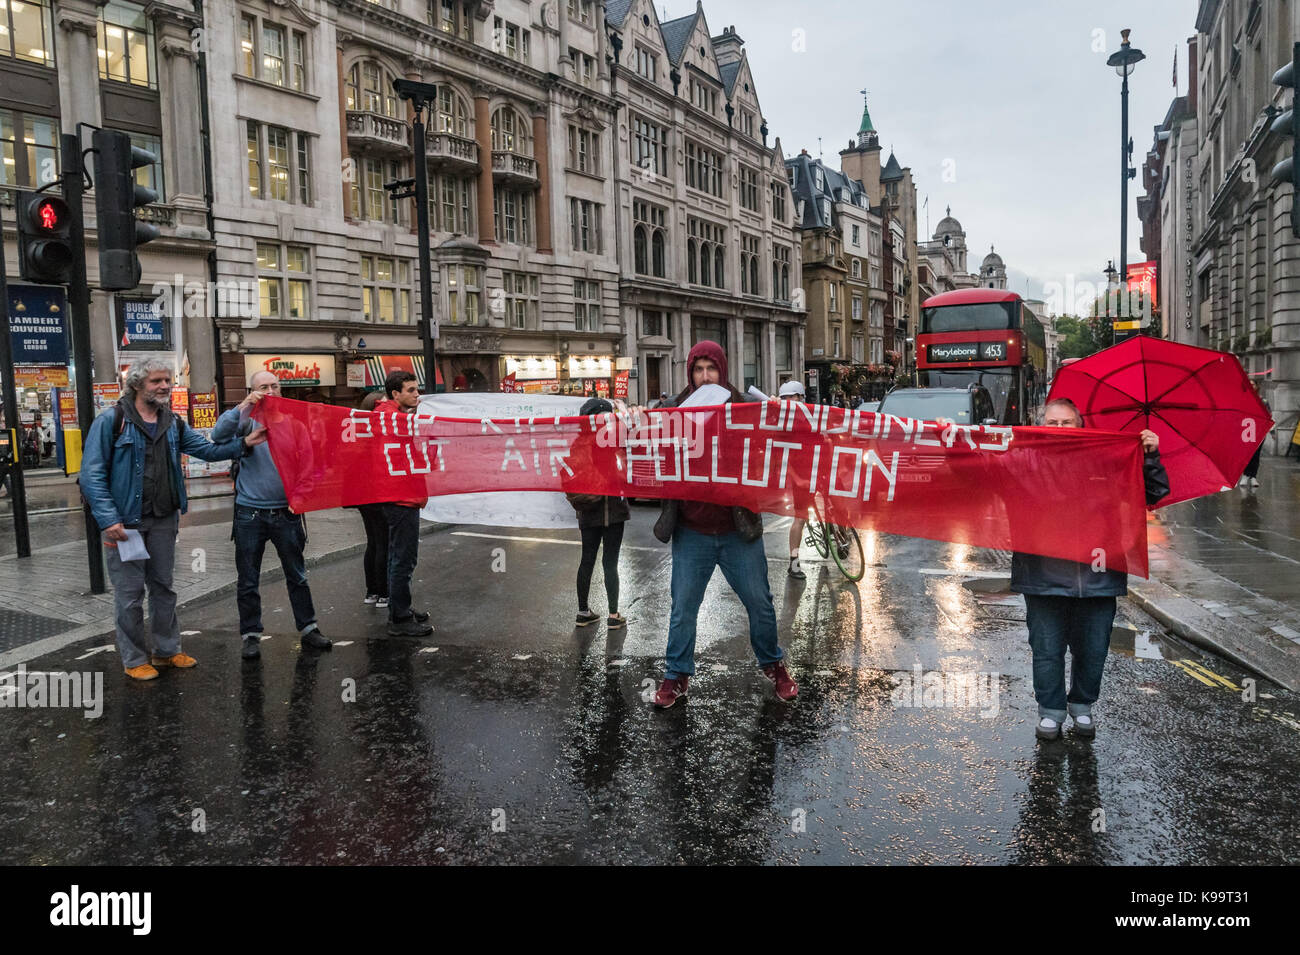 September 21, 2017 - London, UK - London, UK. 21st September 2017. Campaigners for 'Stop Killing Londoners' hold a banner across Whitehall to clear Trafalgar Square of traffic in a short protest against the illegal levels of air pollution in the capital which result in 9,500 premature deaths and much suffering from respiratory disease. In a carefully planned protest they blocked all five entrances to the roundabout at the square, emptying it of traffic while they spoke about the problem and handed out leaflets. This was the 5th protest by campaigners from Rising Up aimed at mobilising people a Stock Photo